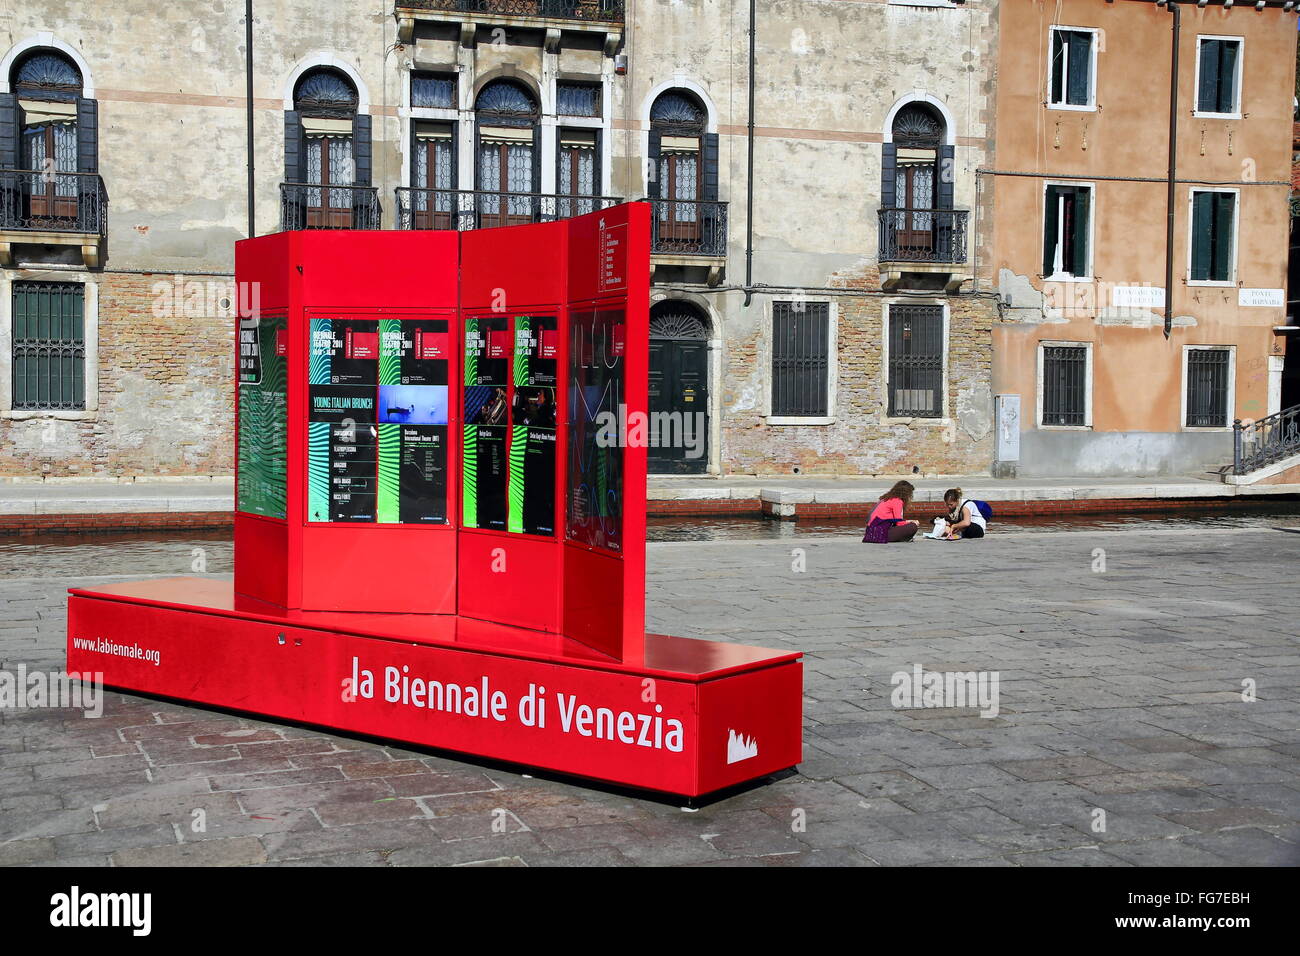 Géographie / voyages, Italie, Vénétie, Venise, Dorsoduro, La Biennale di Venezia, stand-up display, Campo di San Barnaba, Additional-Rights Clearance-Info-Not-Available- Banque D'Images